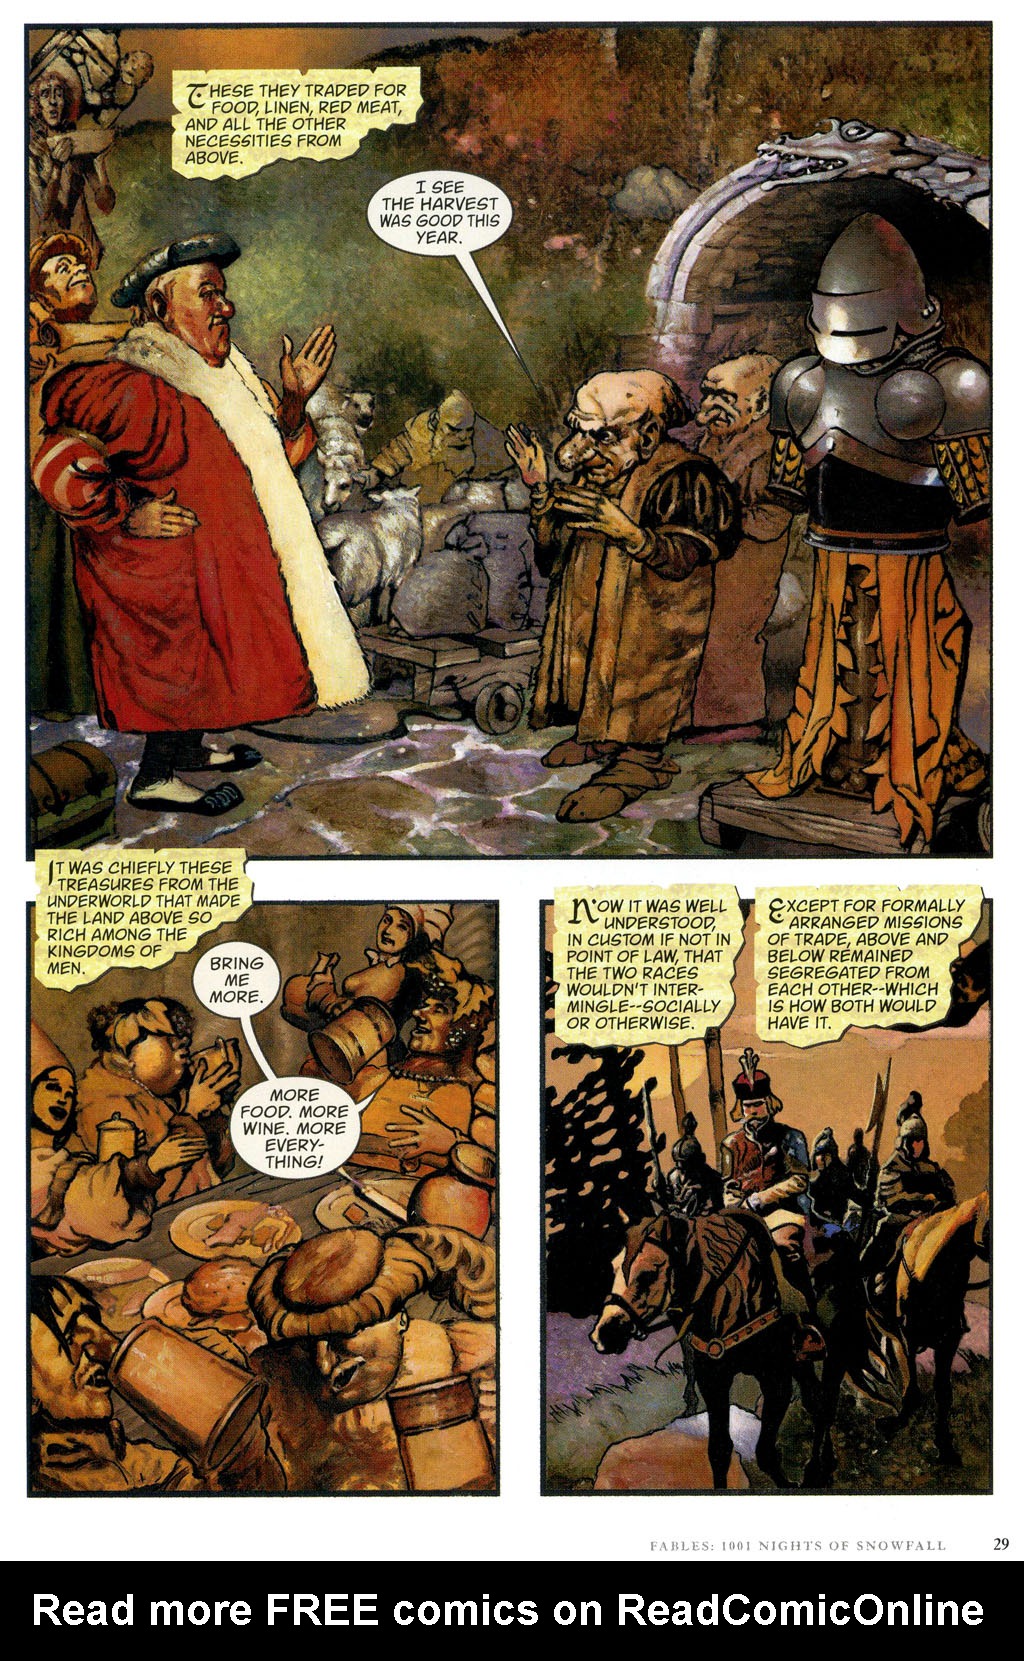 Read online Fables: 1001 Nights of Snowfall comic -  Issue # Full - 29